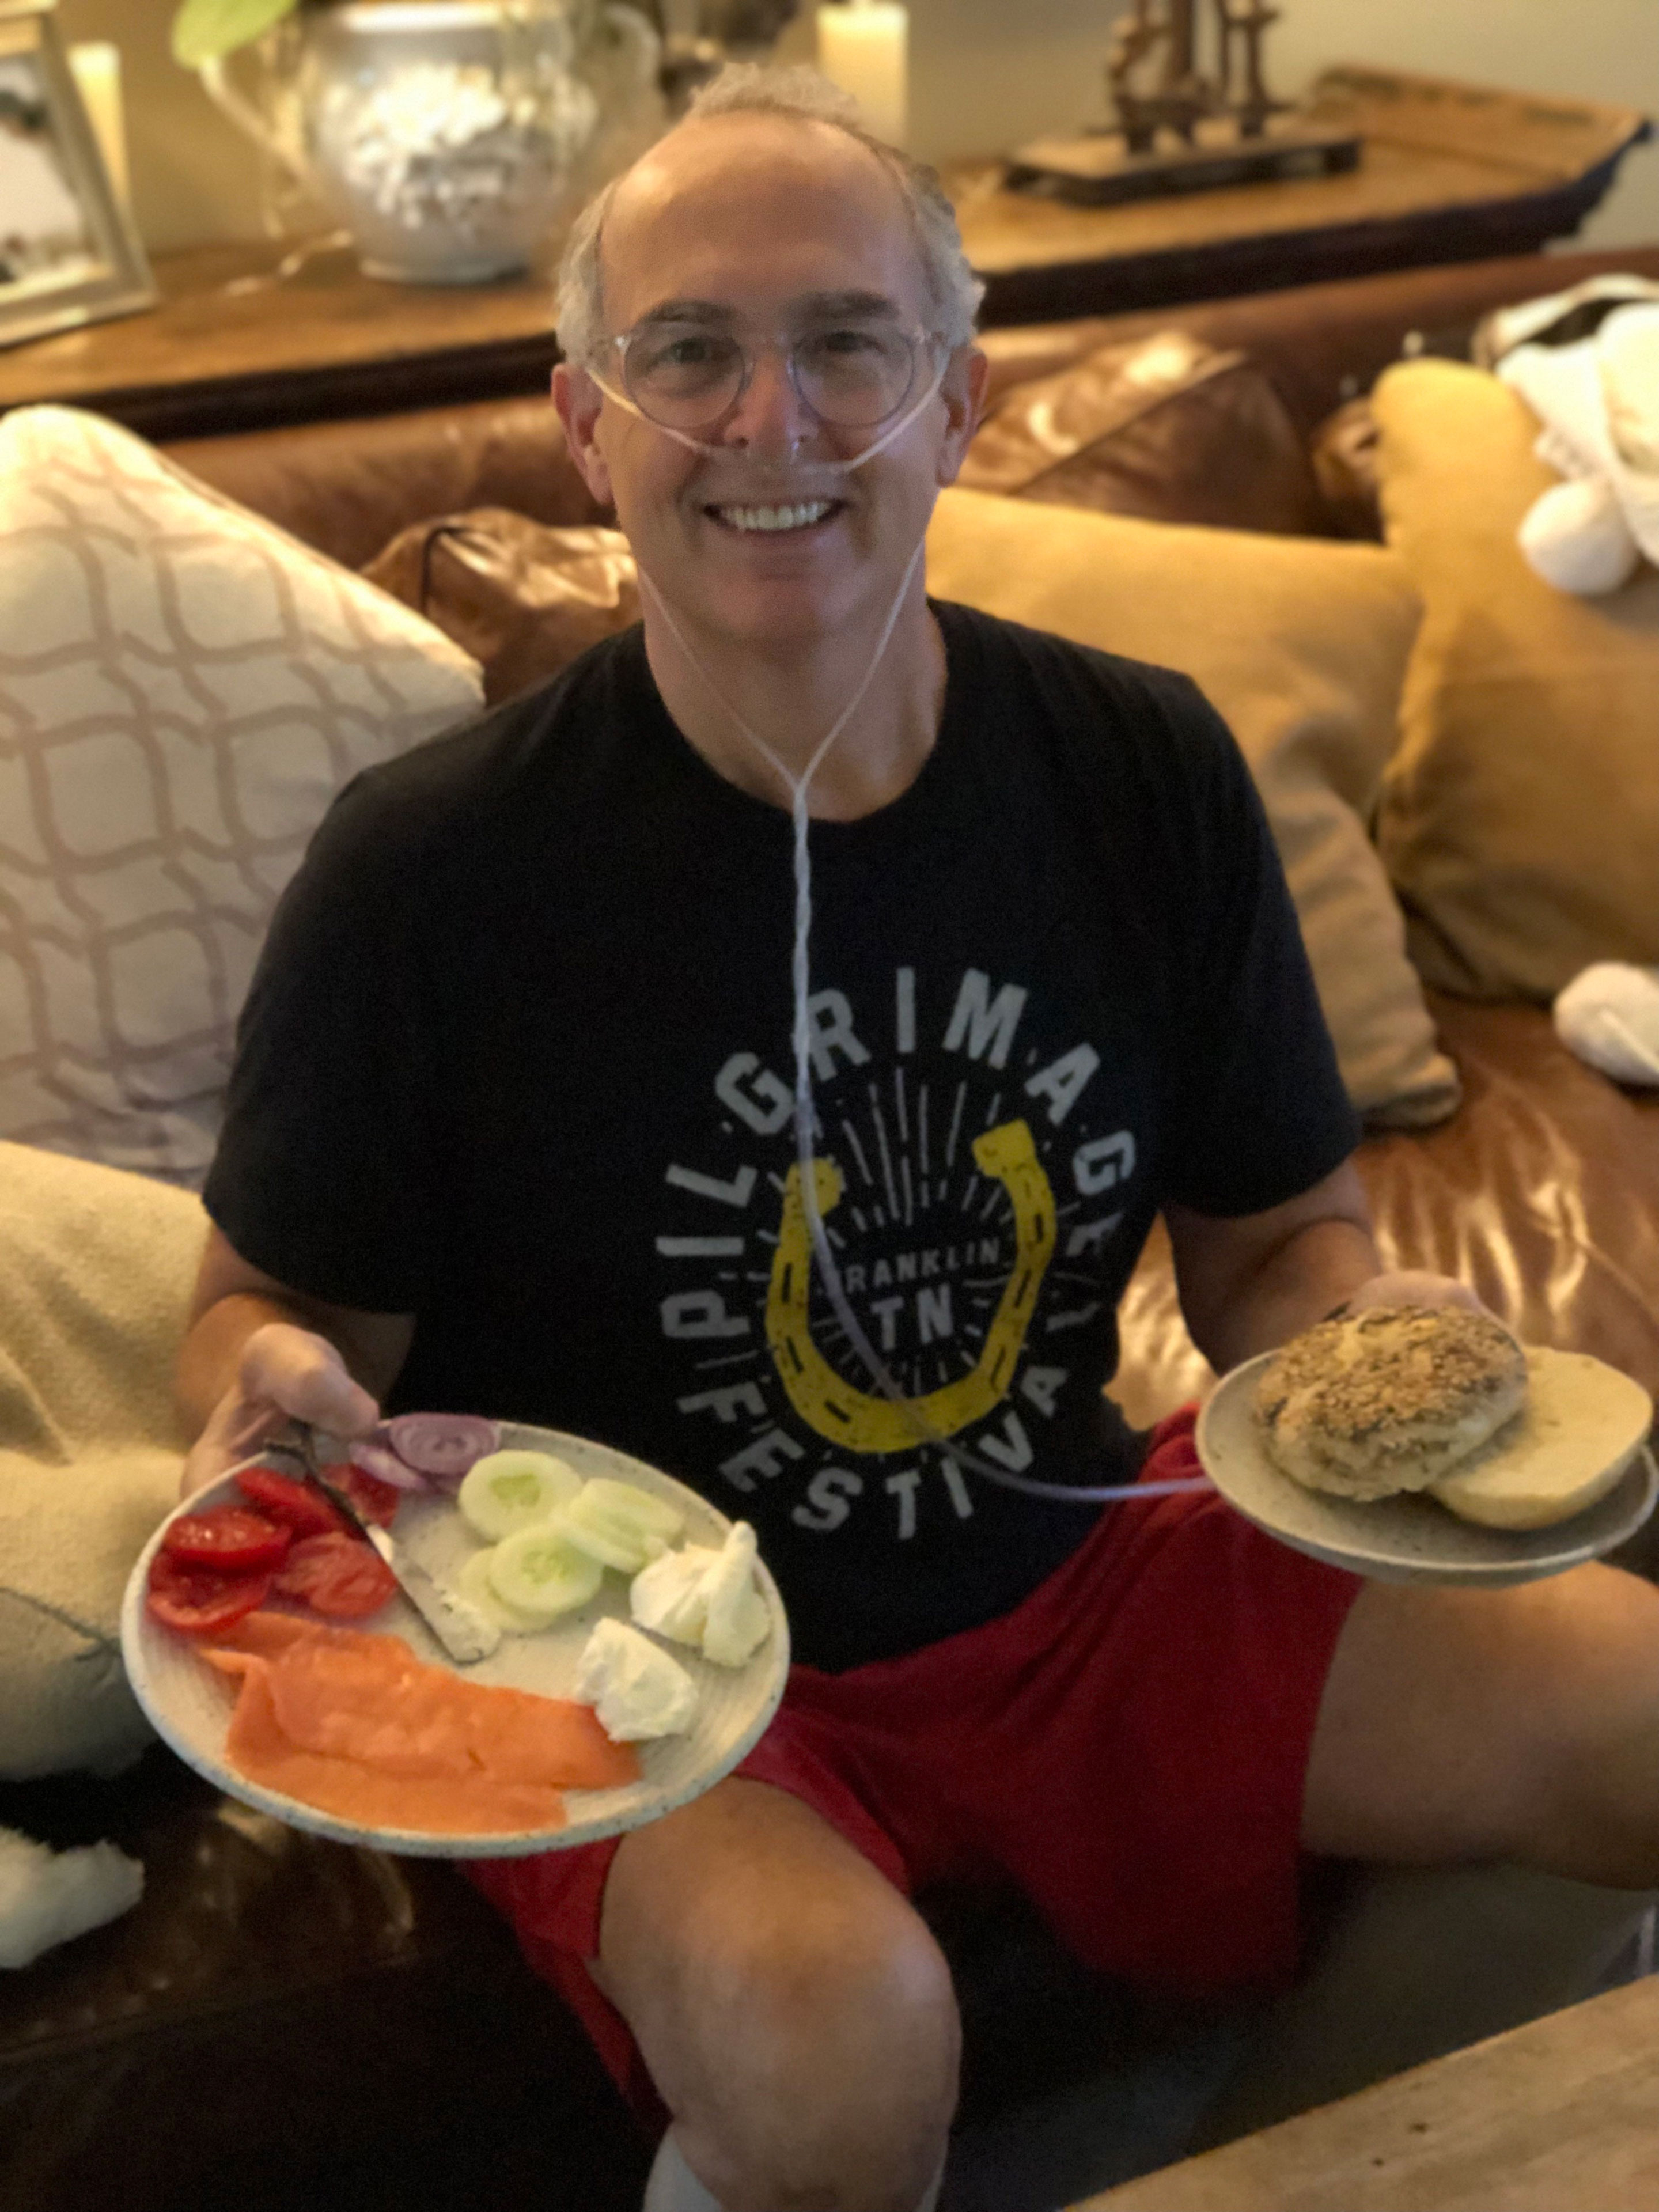 A smiling man wearing a nasal cannula sits on a couch holding a plate of food in each hand. 